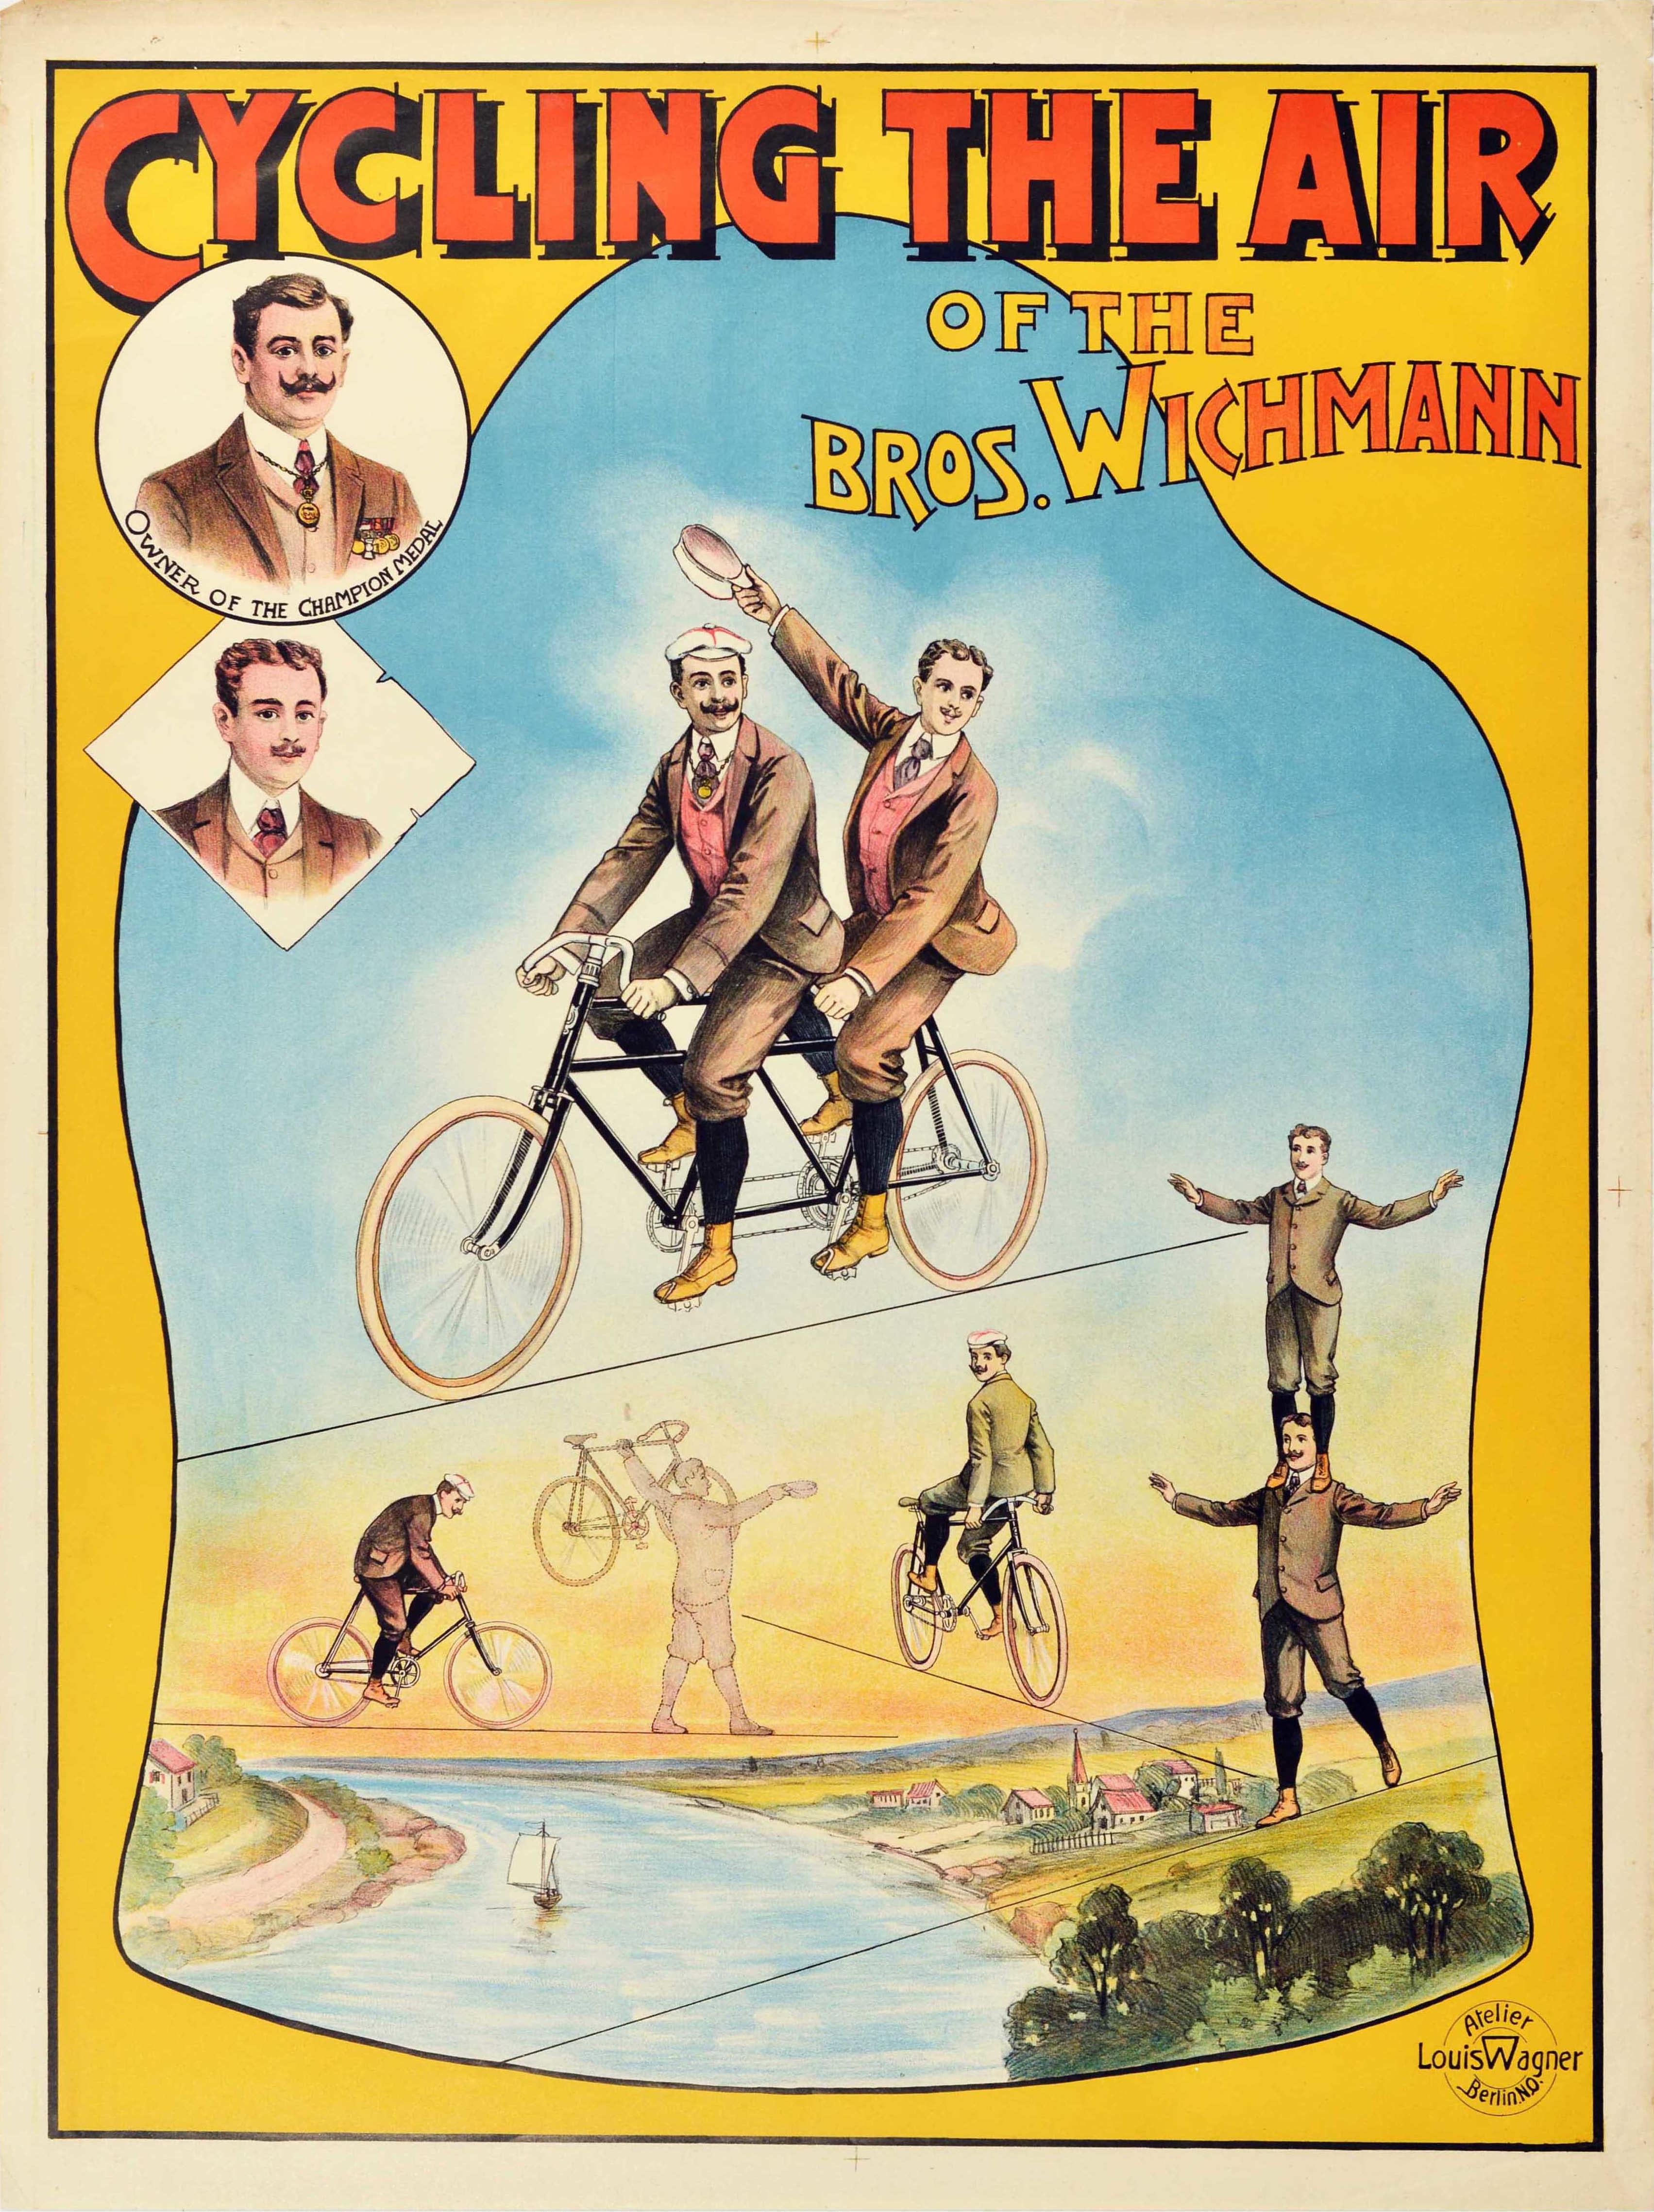 Unknown Print - Original Antique Circus Advertising Poster Cycling The Air Bros Wichmann Design